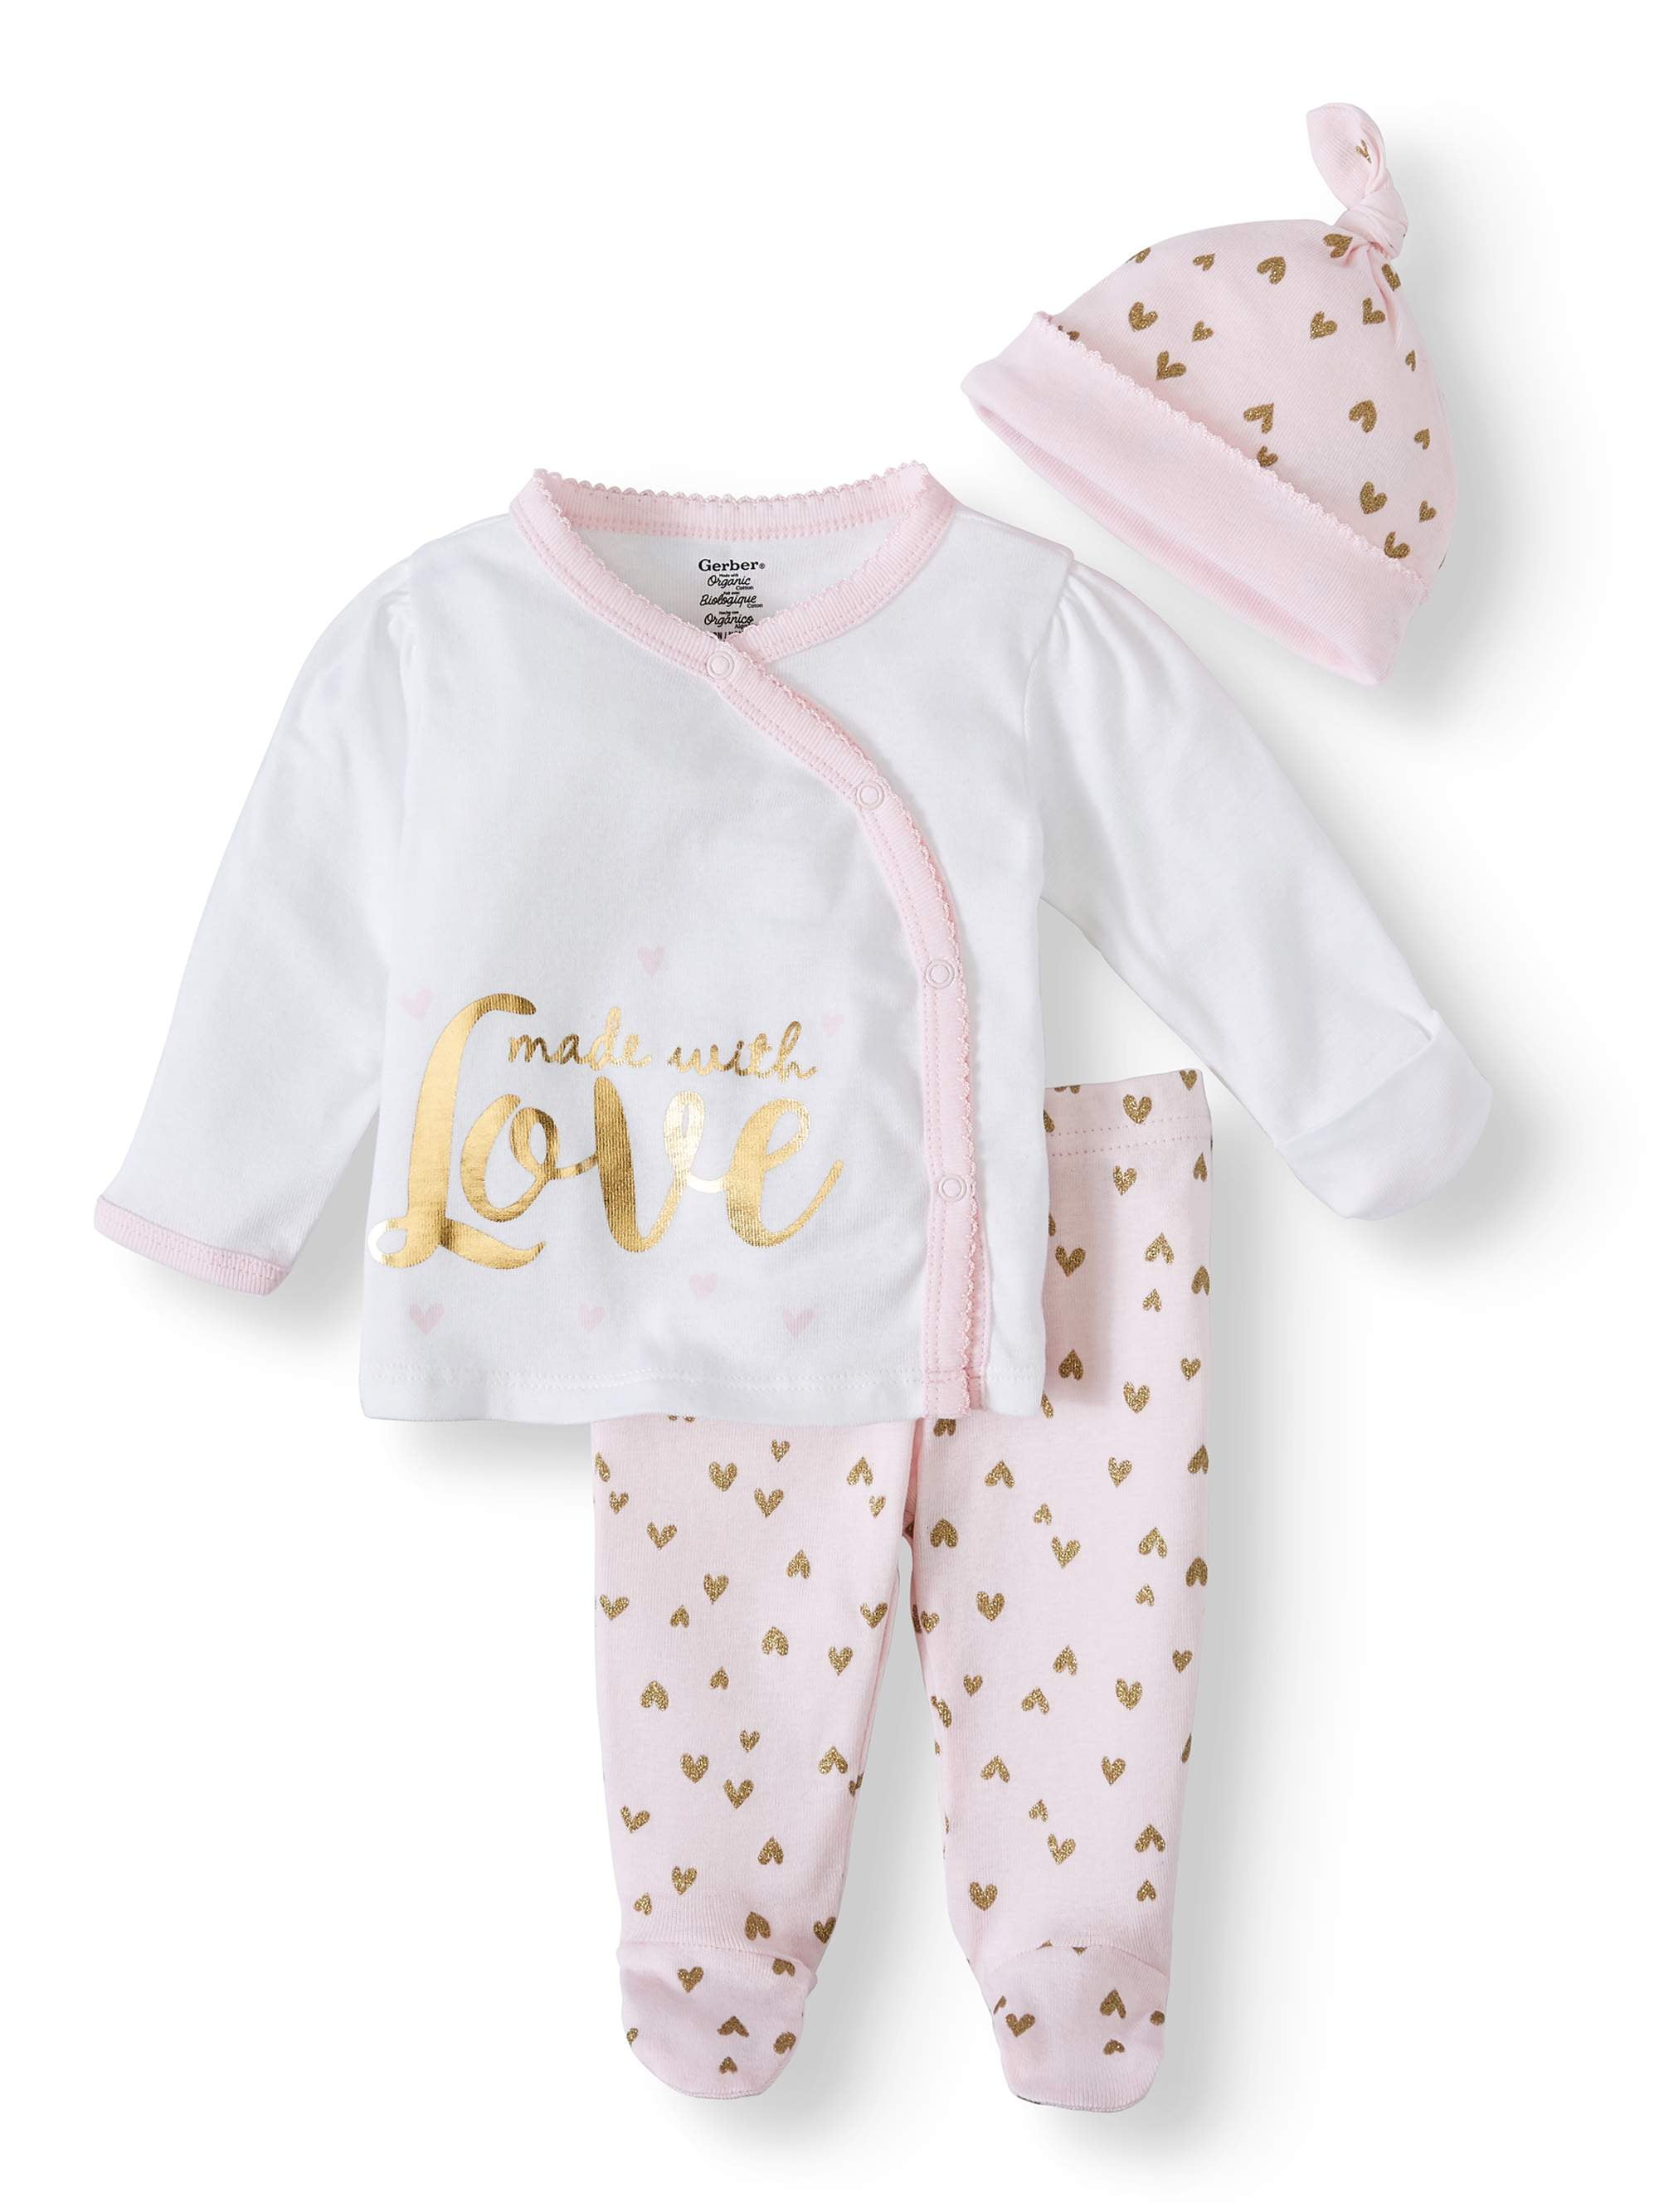 White Infant Bodysuit With Gold Glitter Hat and Headband Baby Girl Coming Home Outfit Leggings Pink with Gold Hearts Baby Girl